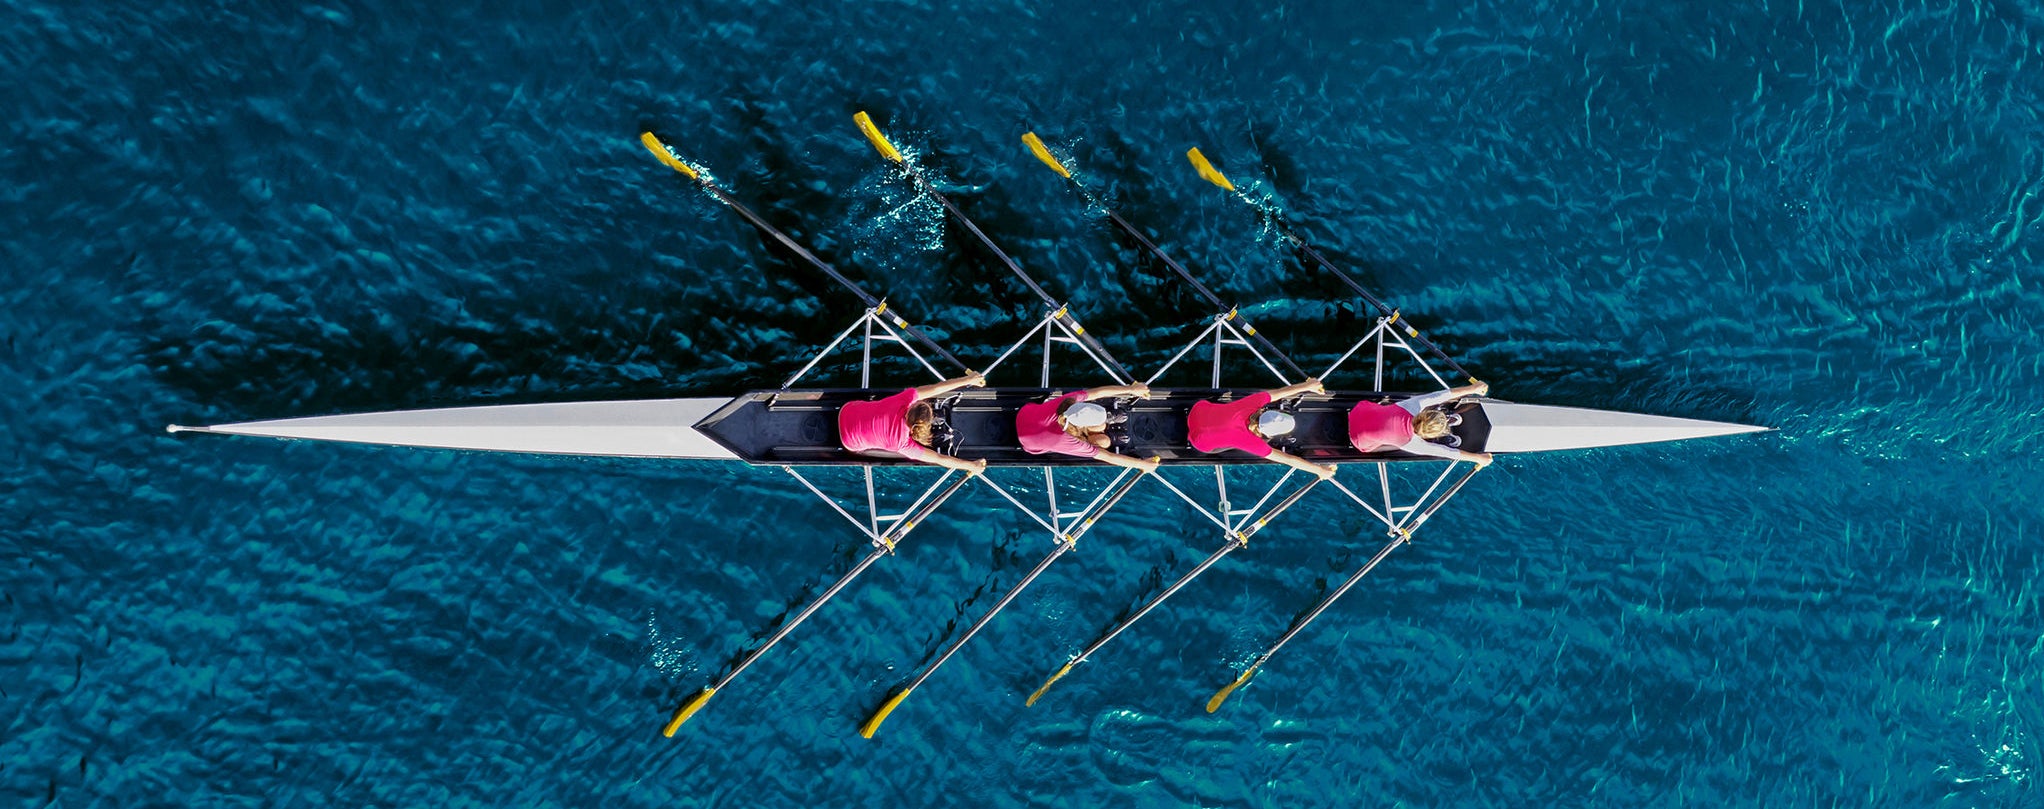 Women's rowing team on blue water, top view